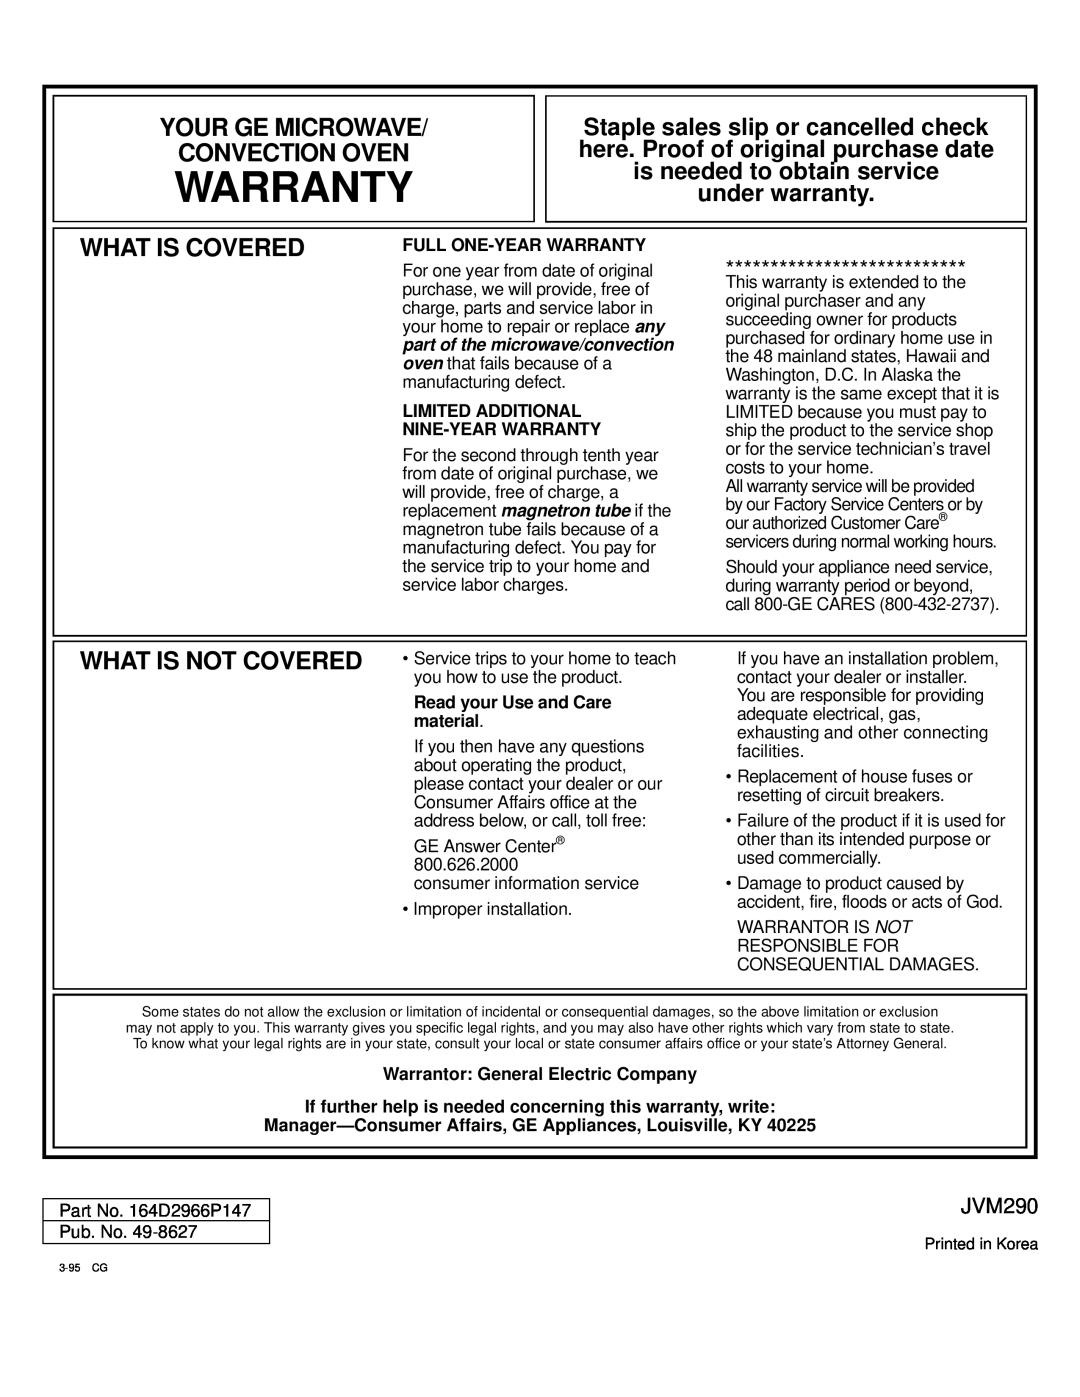 GE JVM290AV Warranty, Your Ge Microwave Convection Oven, What Is Covered, What Is Not Covered, under warranty, material 